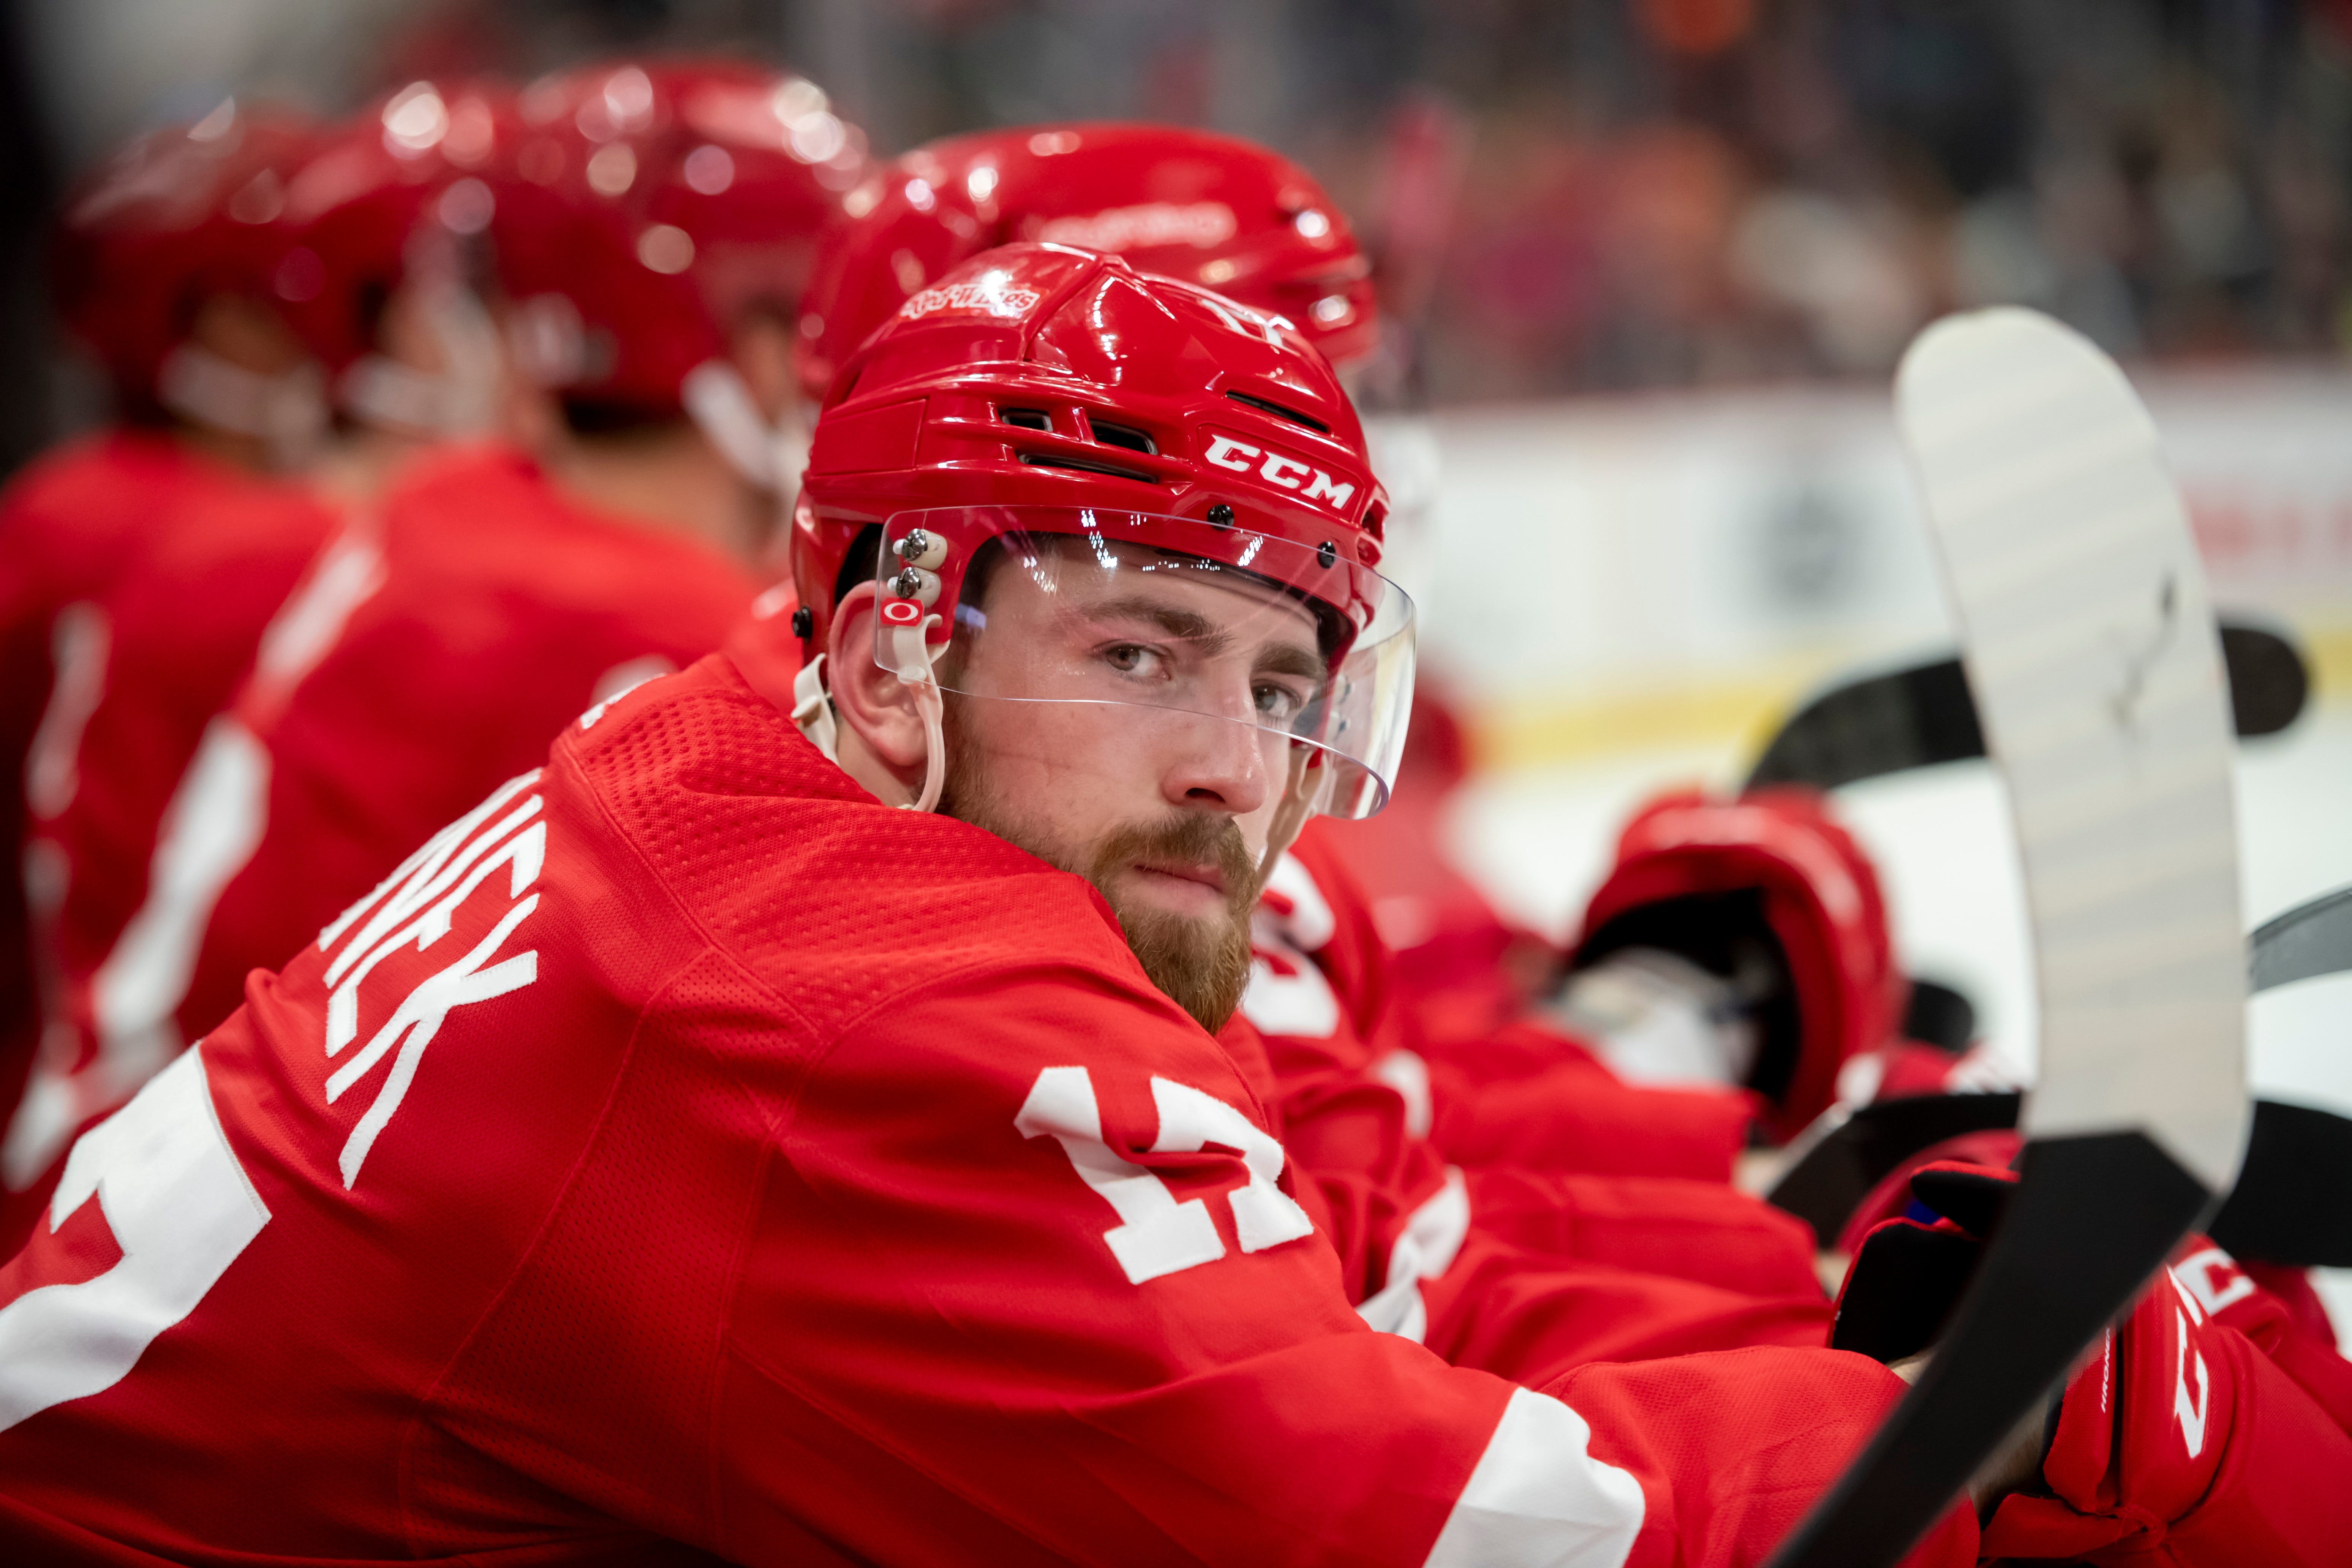 Filip Hronek – AGE: 22: CONTRACT: Ends 2021, $714,166 per. STATS: 65 games, 9 goals, 22 assists. COMMENT: Hronek was thrust into a larger role than the Wings likely envisioned for him this season but he handled it as well as possible. His persistent, no-quit attitude is a plus during this rebuild. GRADE: B.